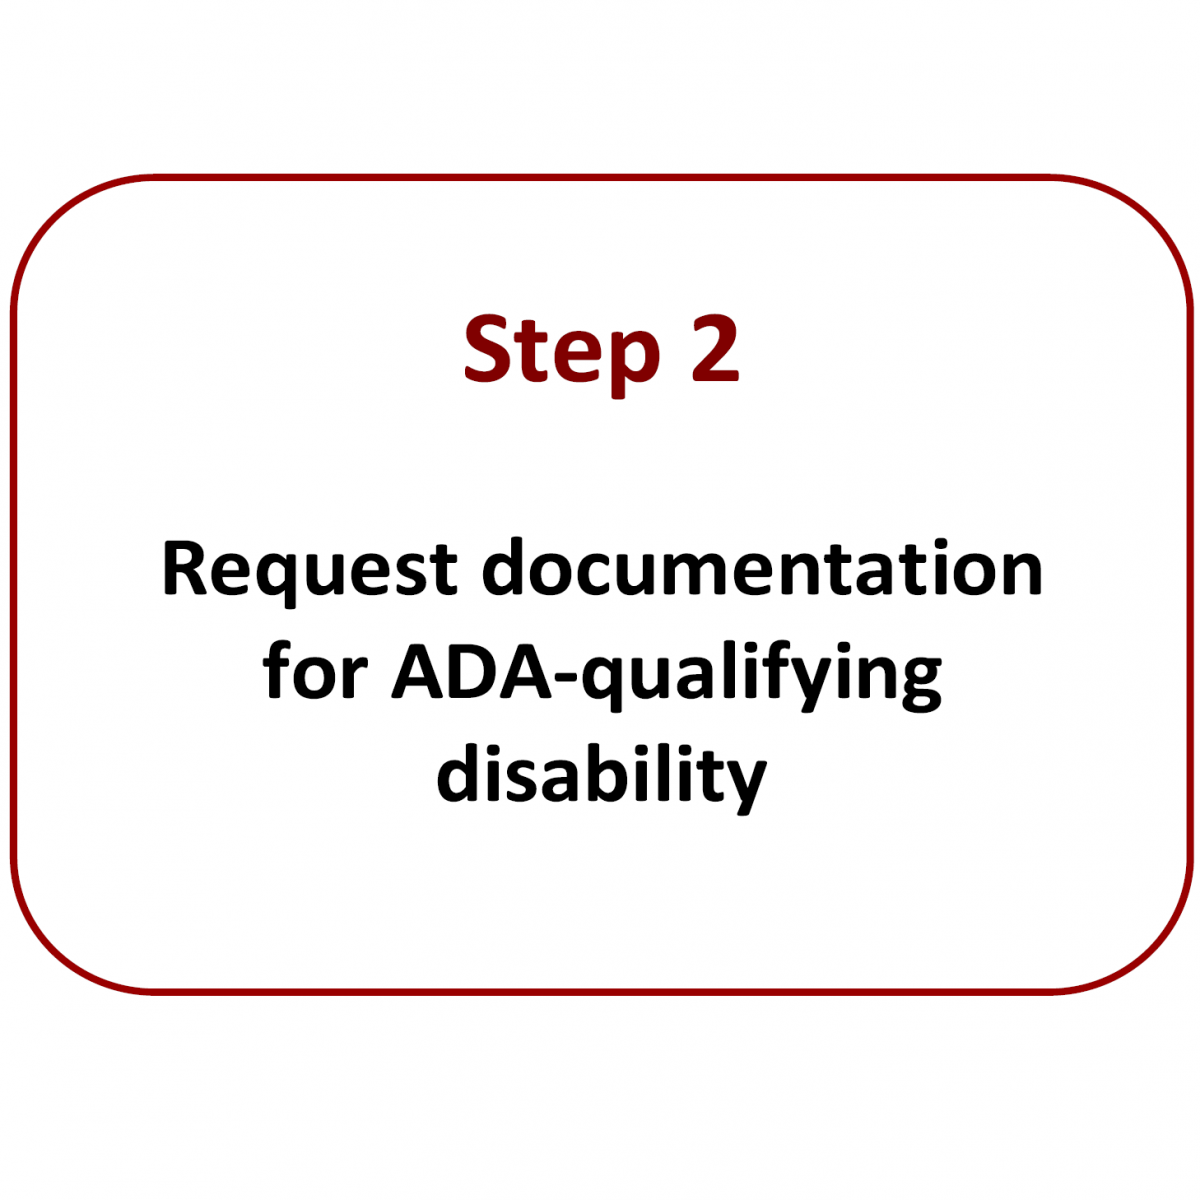 Step 2: Request documentation for ADA-qualifying disability